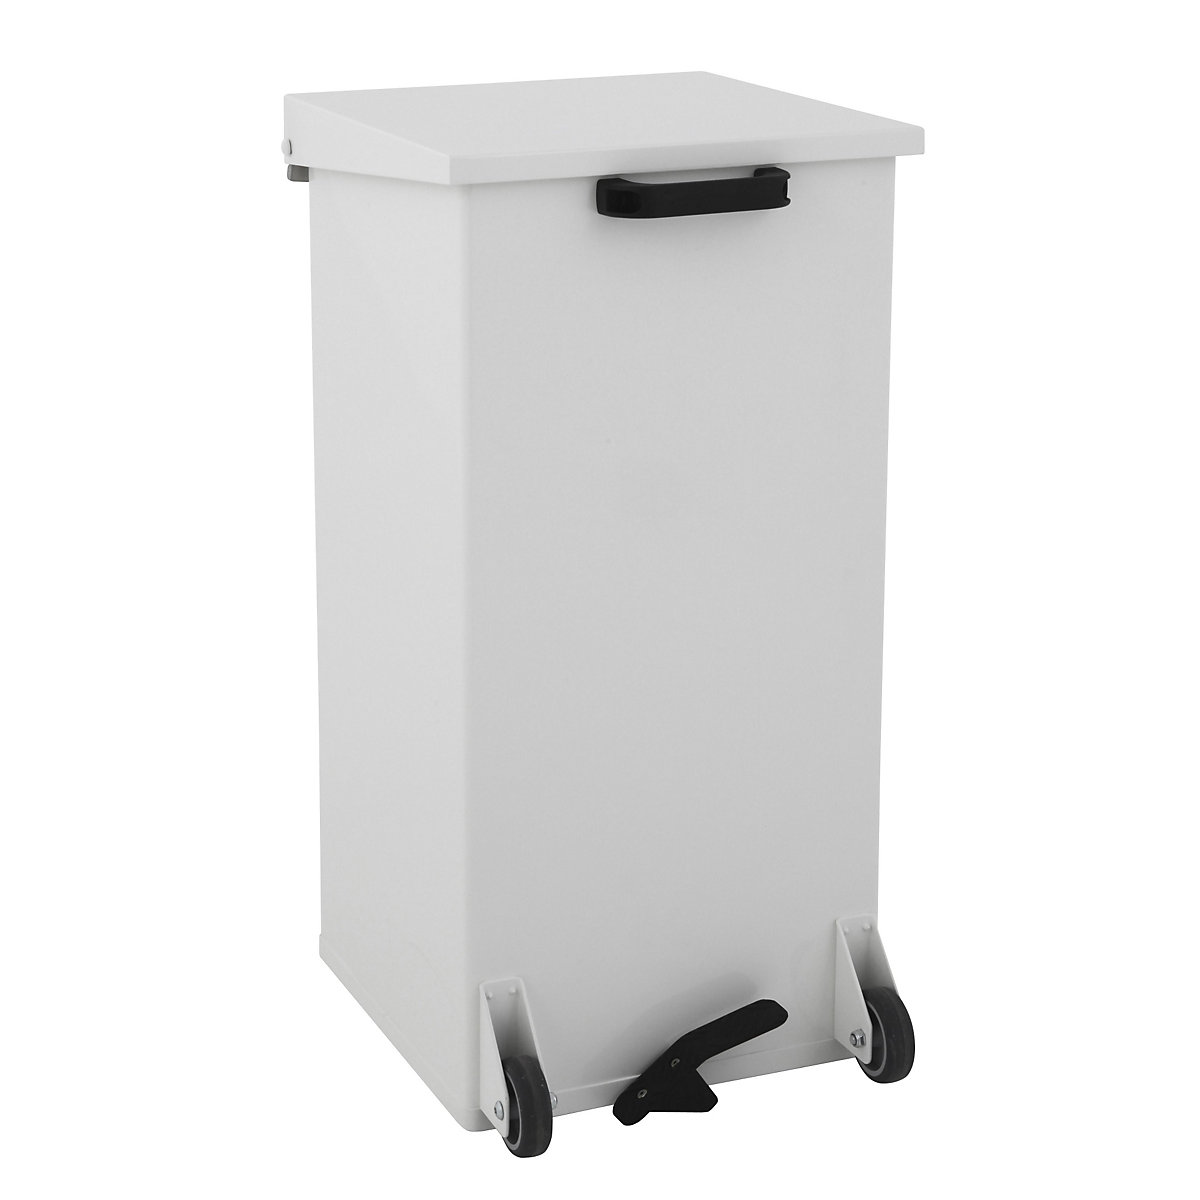 Pedal operated waste collector with castors